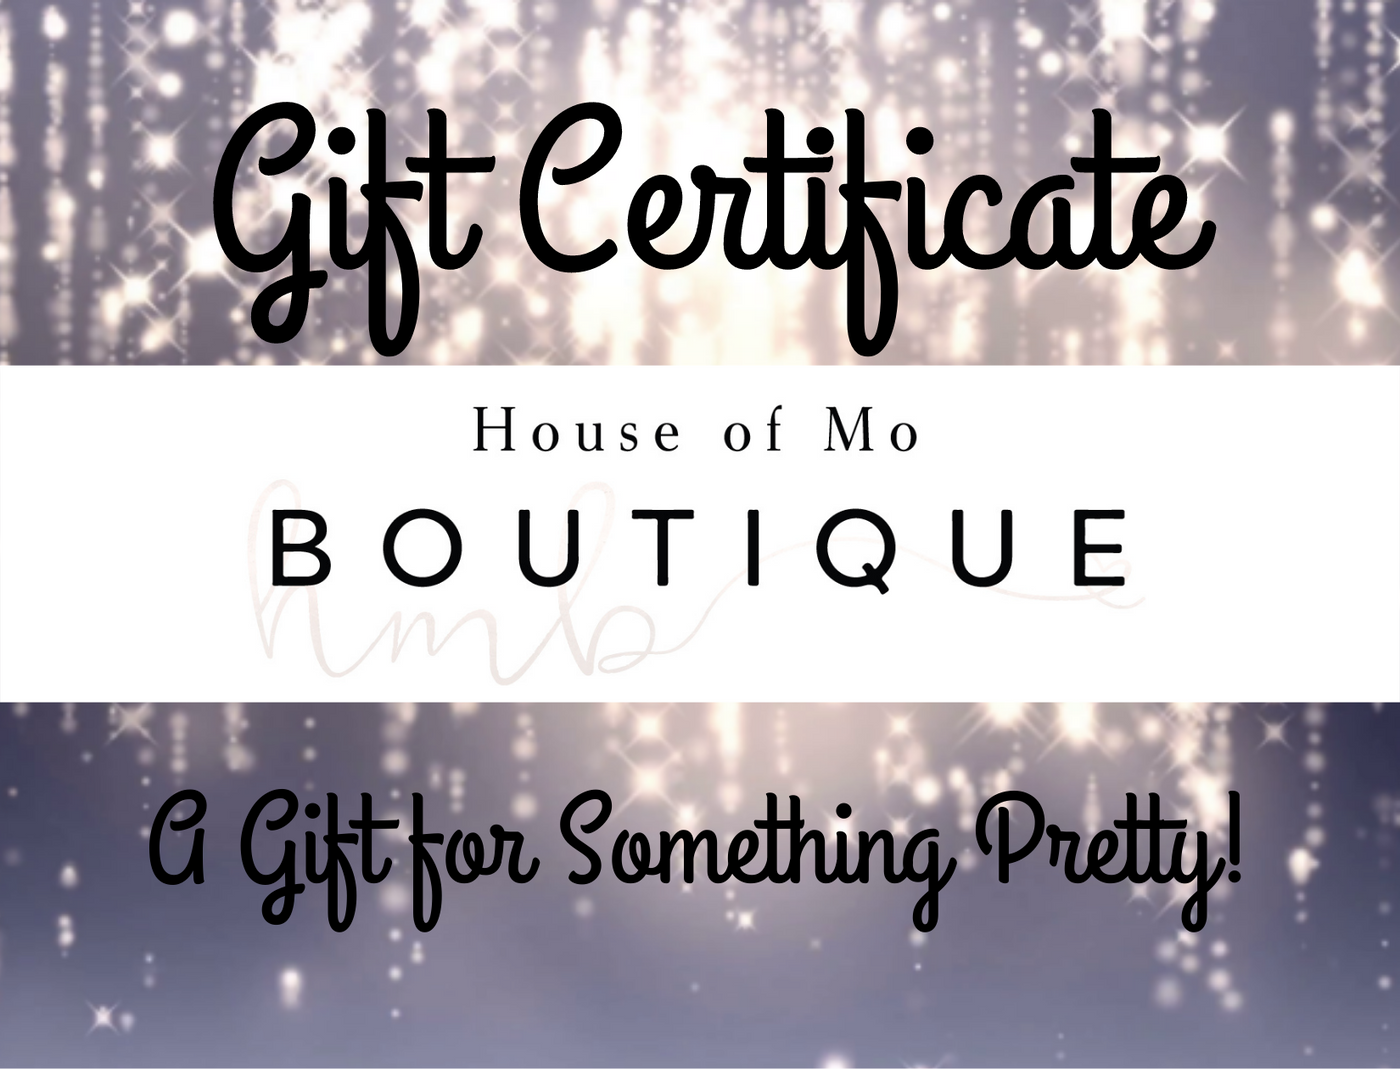 Merry Christmas Complimentary Gift Certificate for Something Pretty!